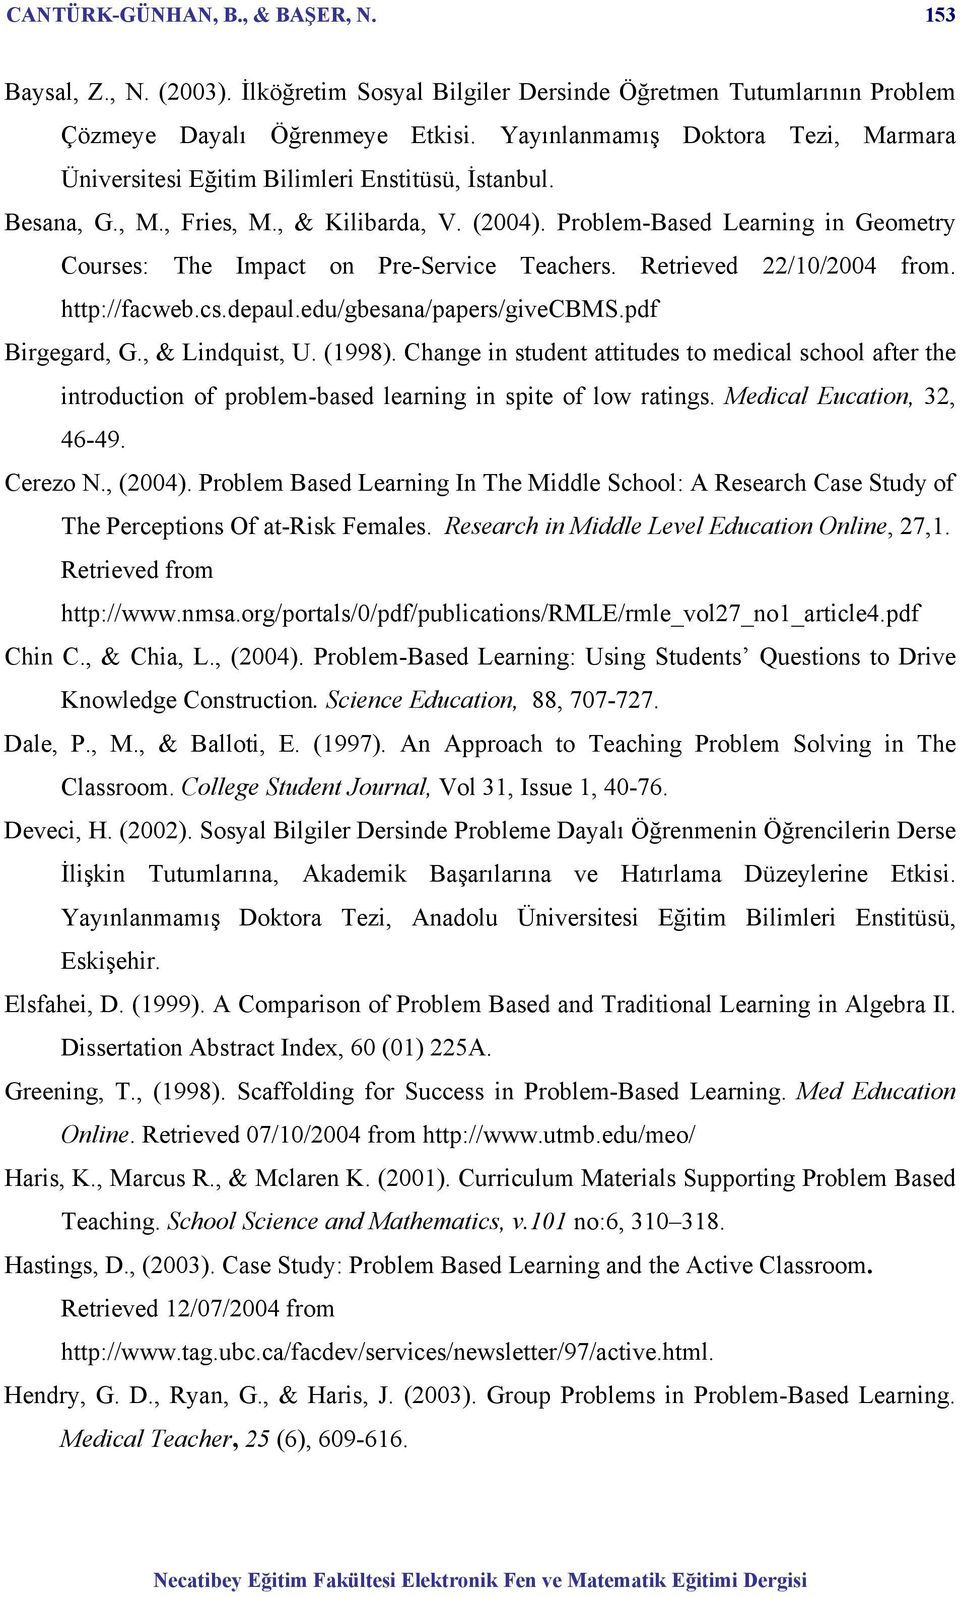 Problem-Based Learning in Geometry Courses: The Impact on Pre-Service Teachers. Retrieved /0/004 from. http://facweb.cs.depaul.edu/gbesana/papers/givecbms.pdf Birgegard, G., & Lindquist, U. (998).